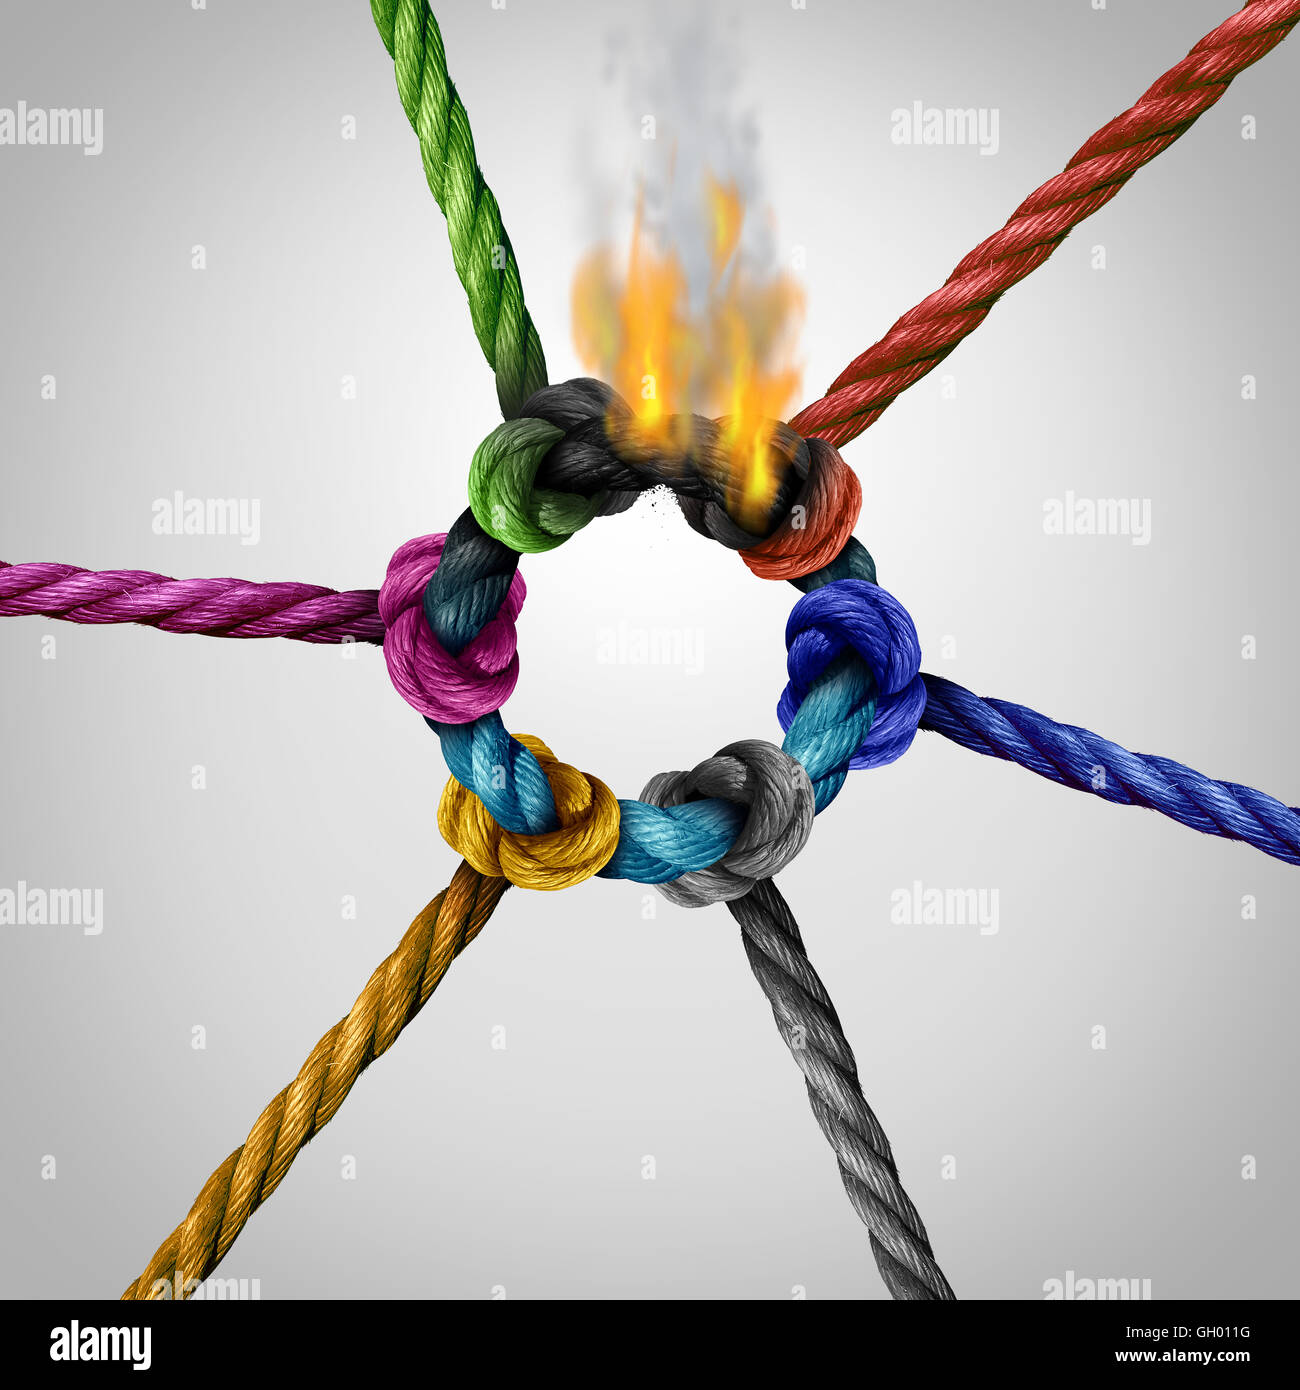 Network connection problem as a business risk concept with a group of diverse ropes connected to a circle on fire burning and breaking the link as a metaphor for connectivity trouble and linking hazard or communication failure. Stock Photo